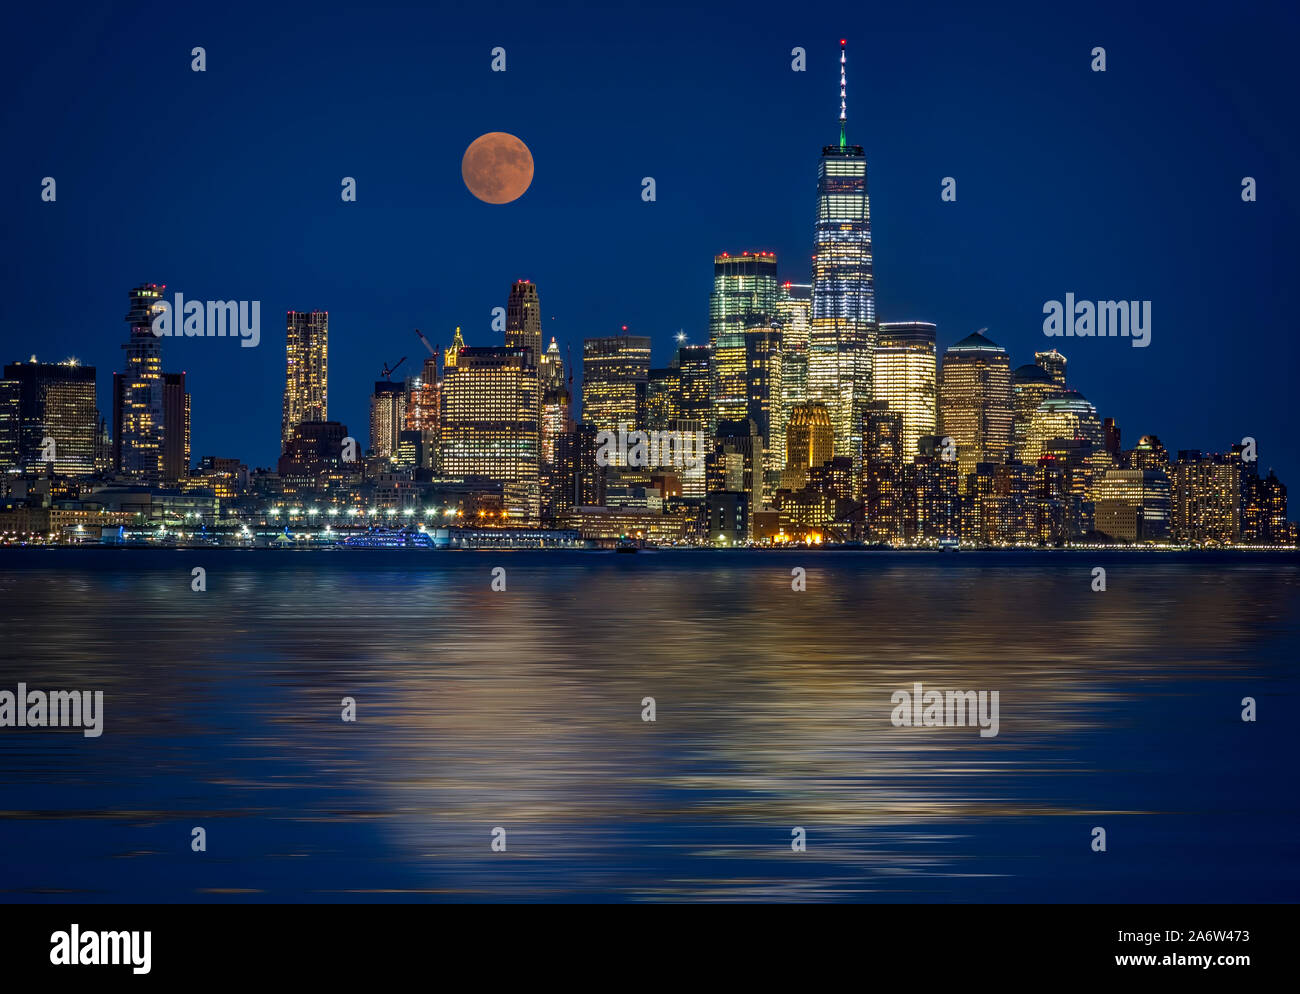 Downtown NYC Skyline  - The NYC skyline with the One World Trade Center WTC commonly known as the Freedom Tower along with a super moon.    This image Stock Photo